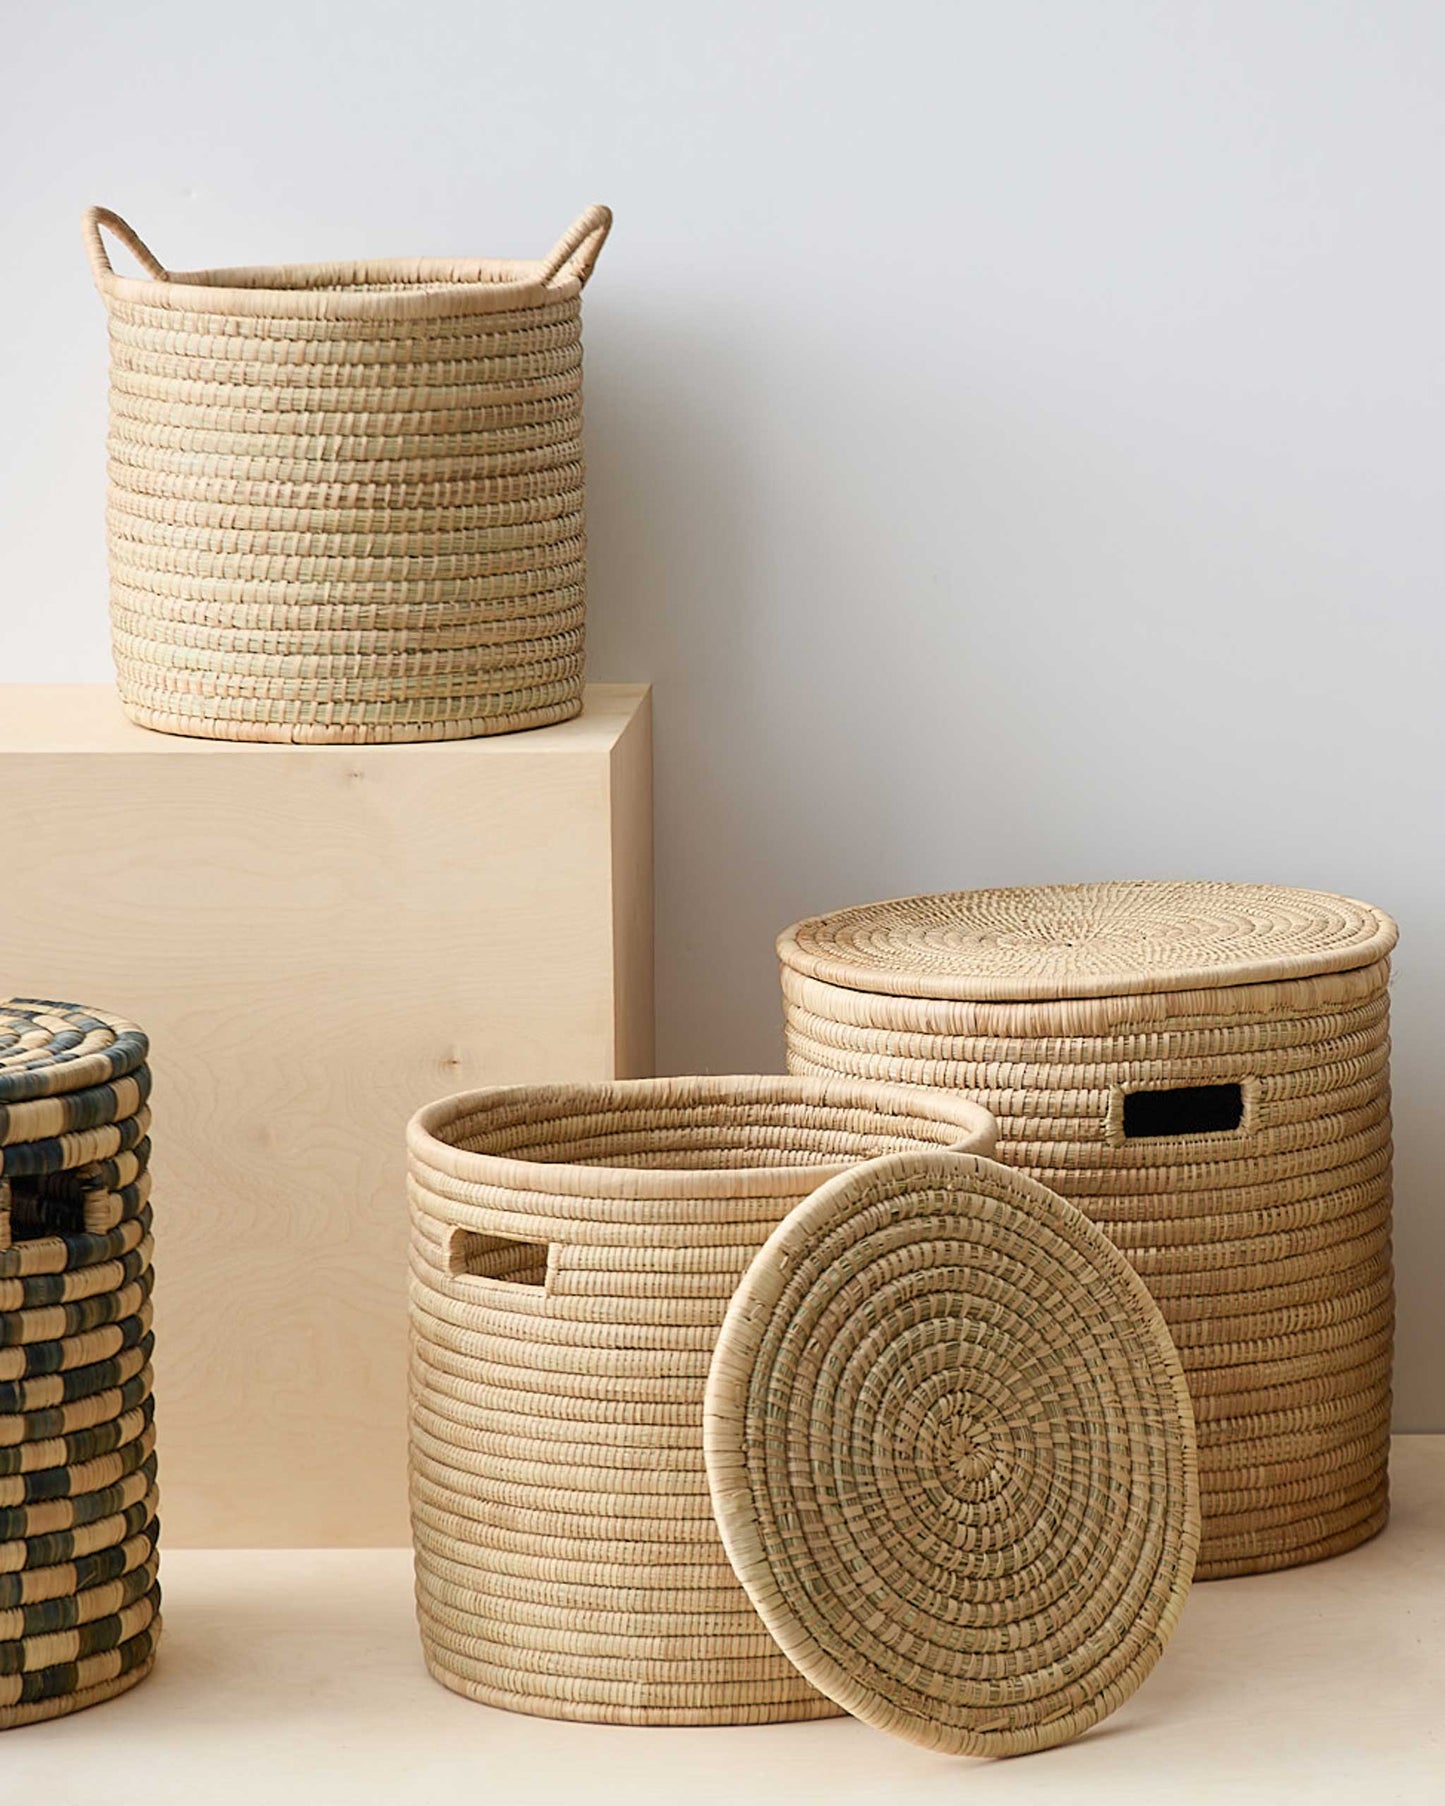 
                  
                    Collection of handwoven baskets made in Malawi with ethically-sourced palm.
                  
                